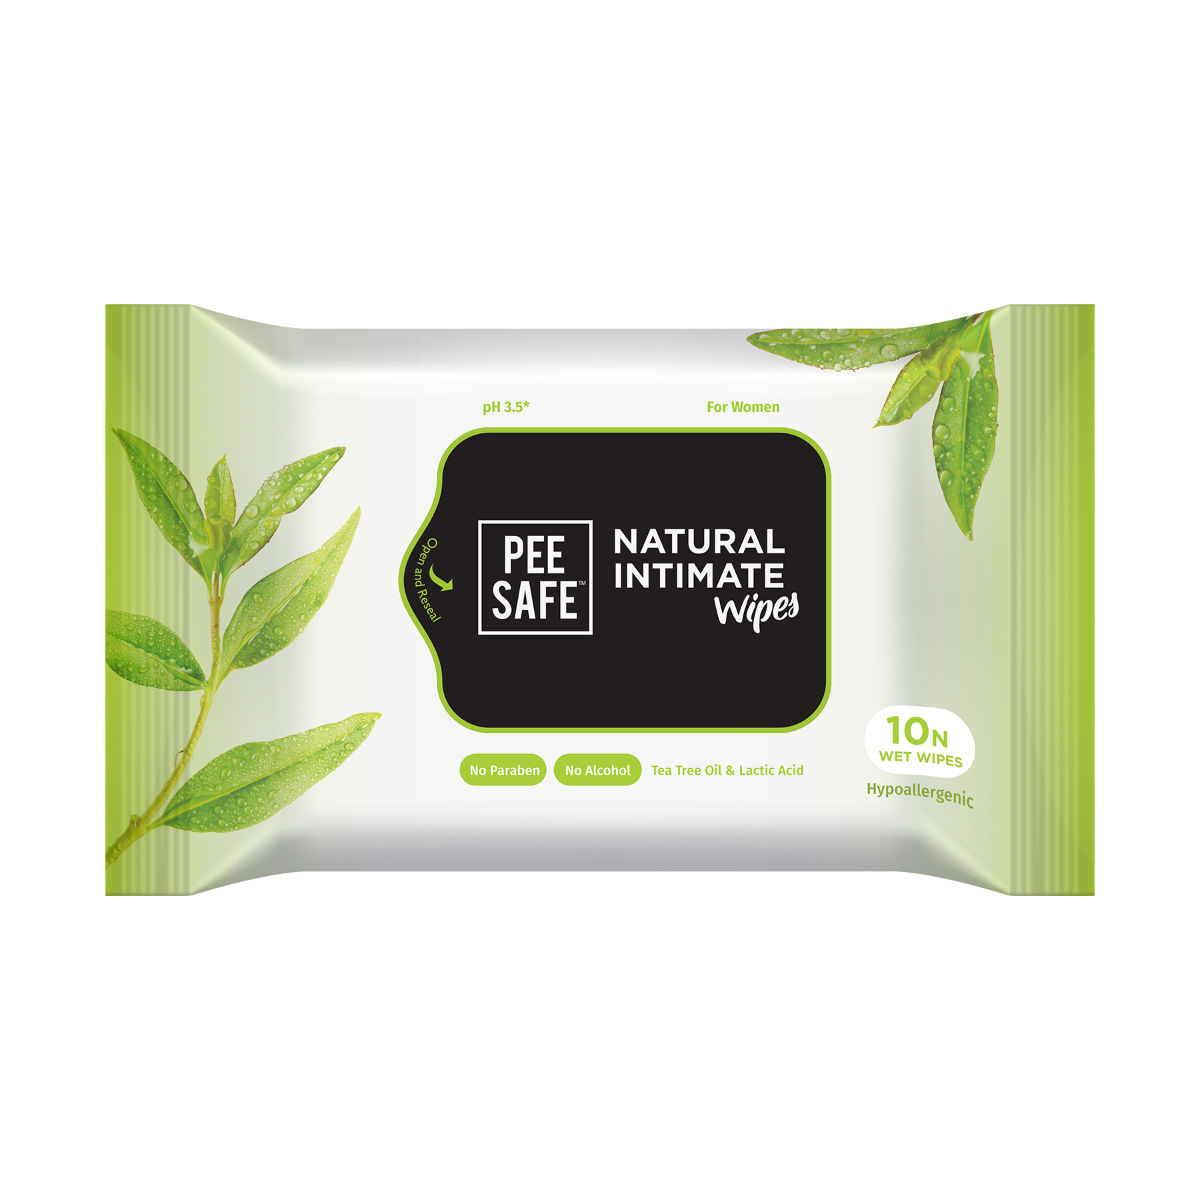 Buy Pee Safe Natural Intimate Wipes, 10 Count Online